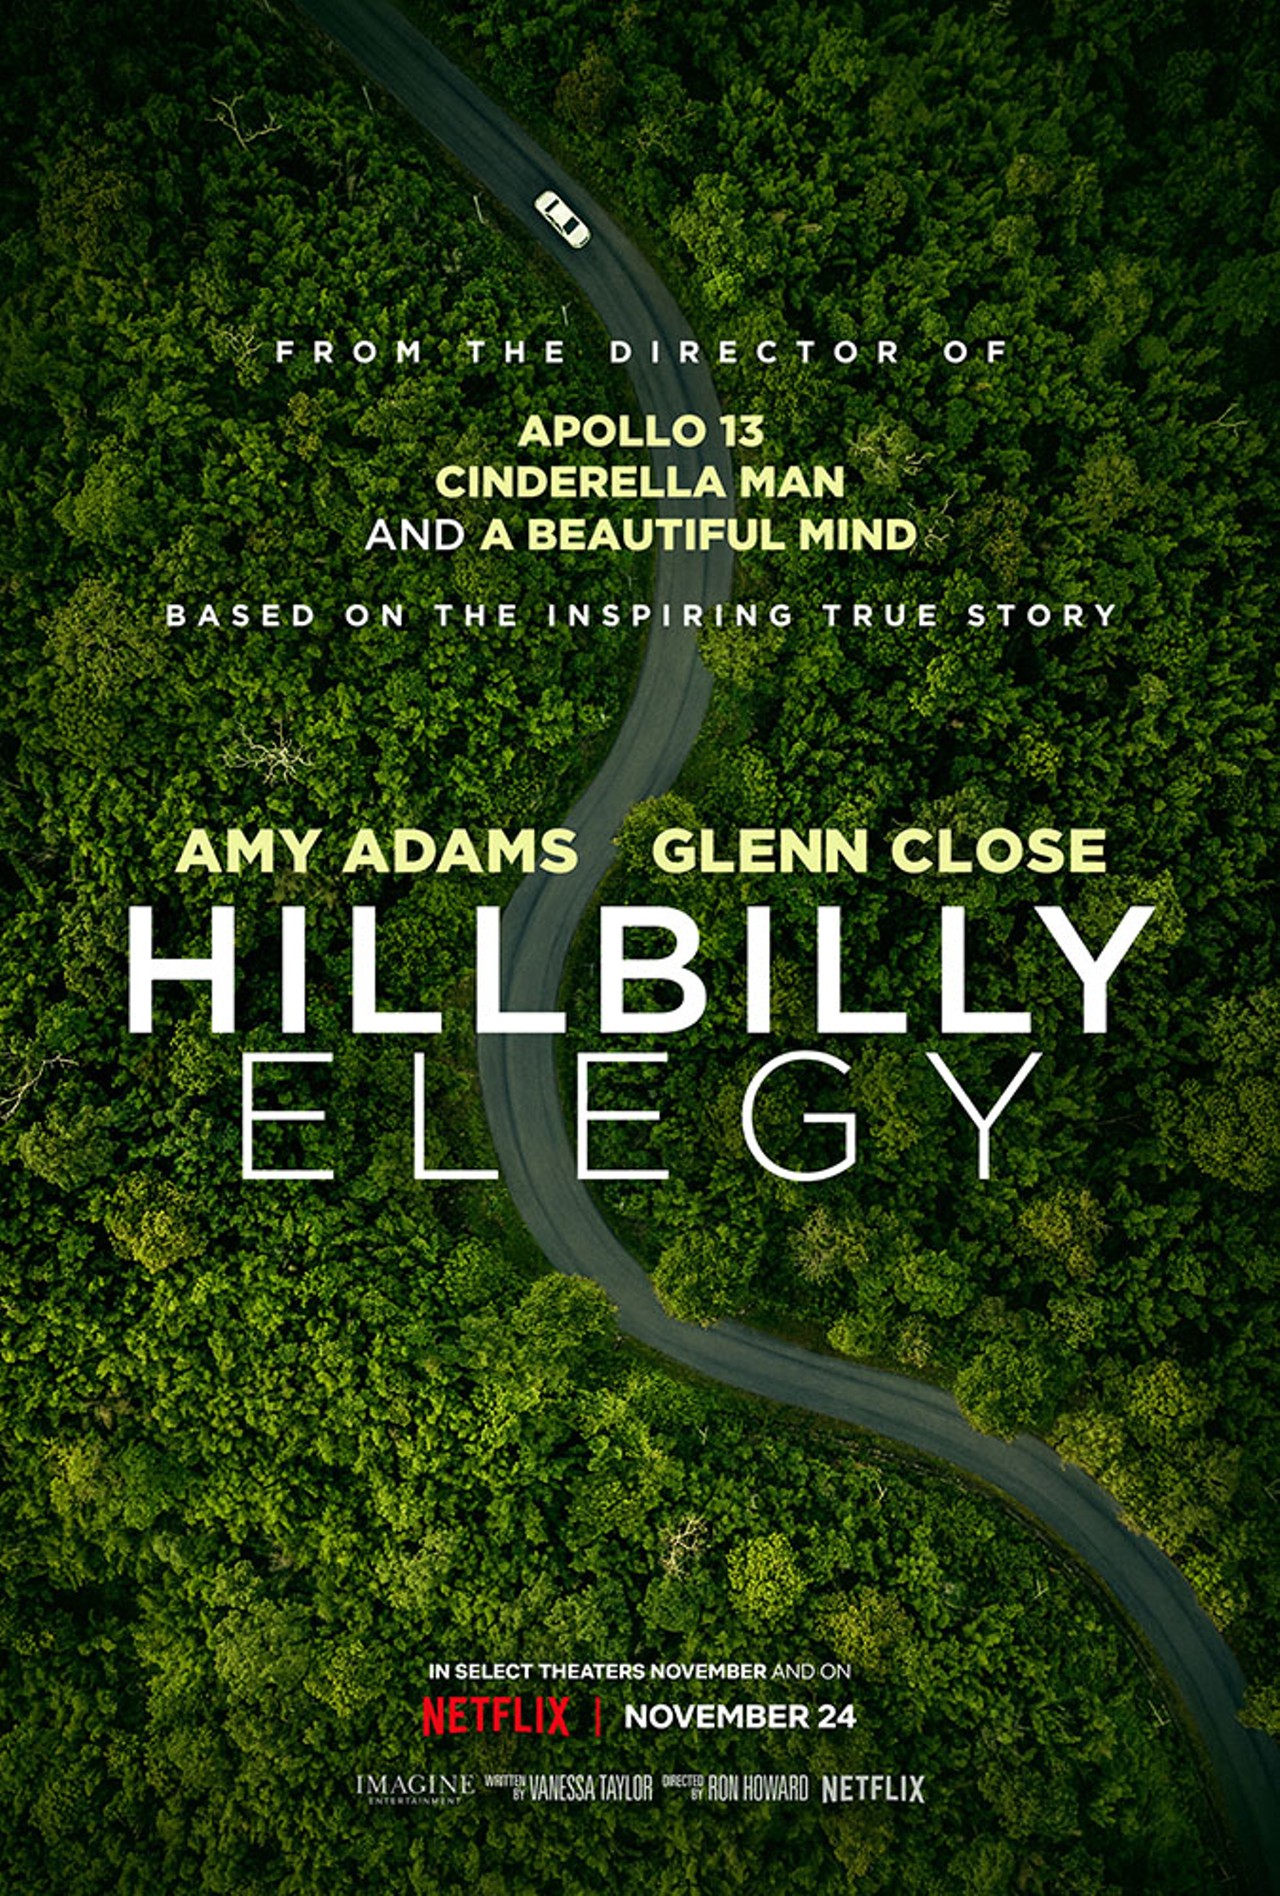 hillbilly elegy poster - From The Director Of Apollo 13 Cinderella Man And A Beautiful Mind Based On The Inspiring True Story Amy Adams Glenn Close Hillbilly Elegy In Select Theaters November And On Netflix November 24 Imagine Walon Netflix